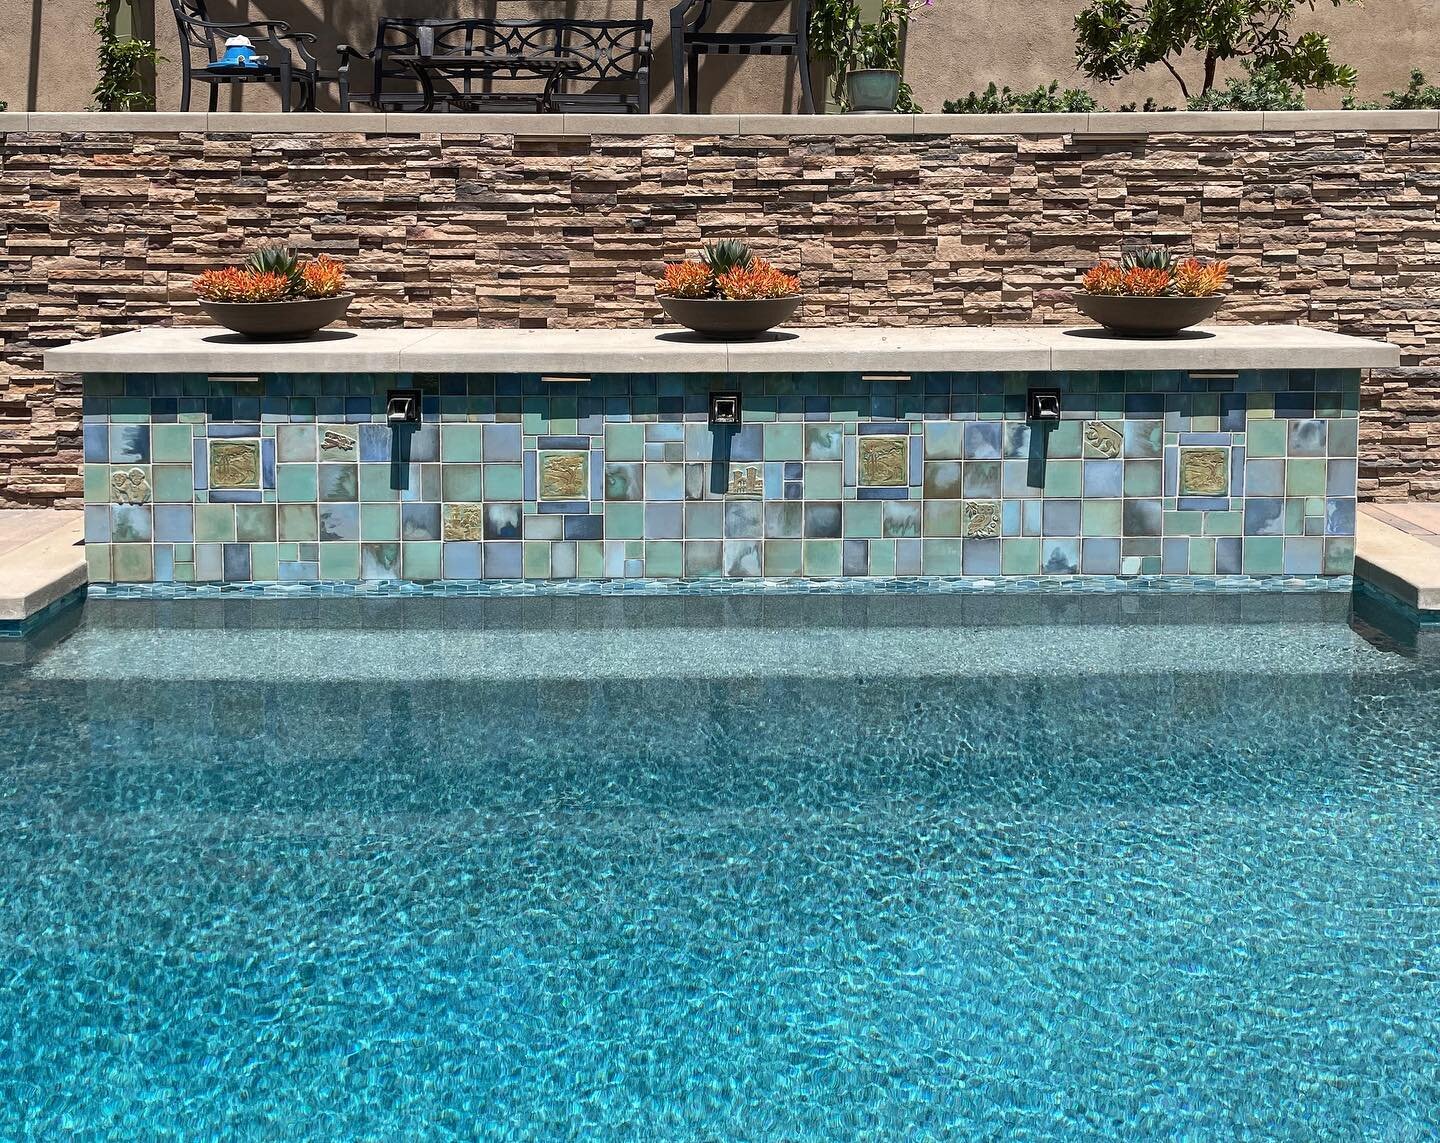 Summer is in full swing and we&rsquo;re having pool envy!
.
.
 #pooltile #gardentiles #landscapingdesign #pooldesign #waterfeatures #gardendesign #poolstyle #craftsmantile